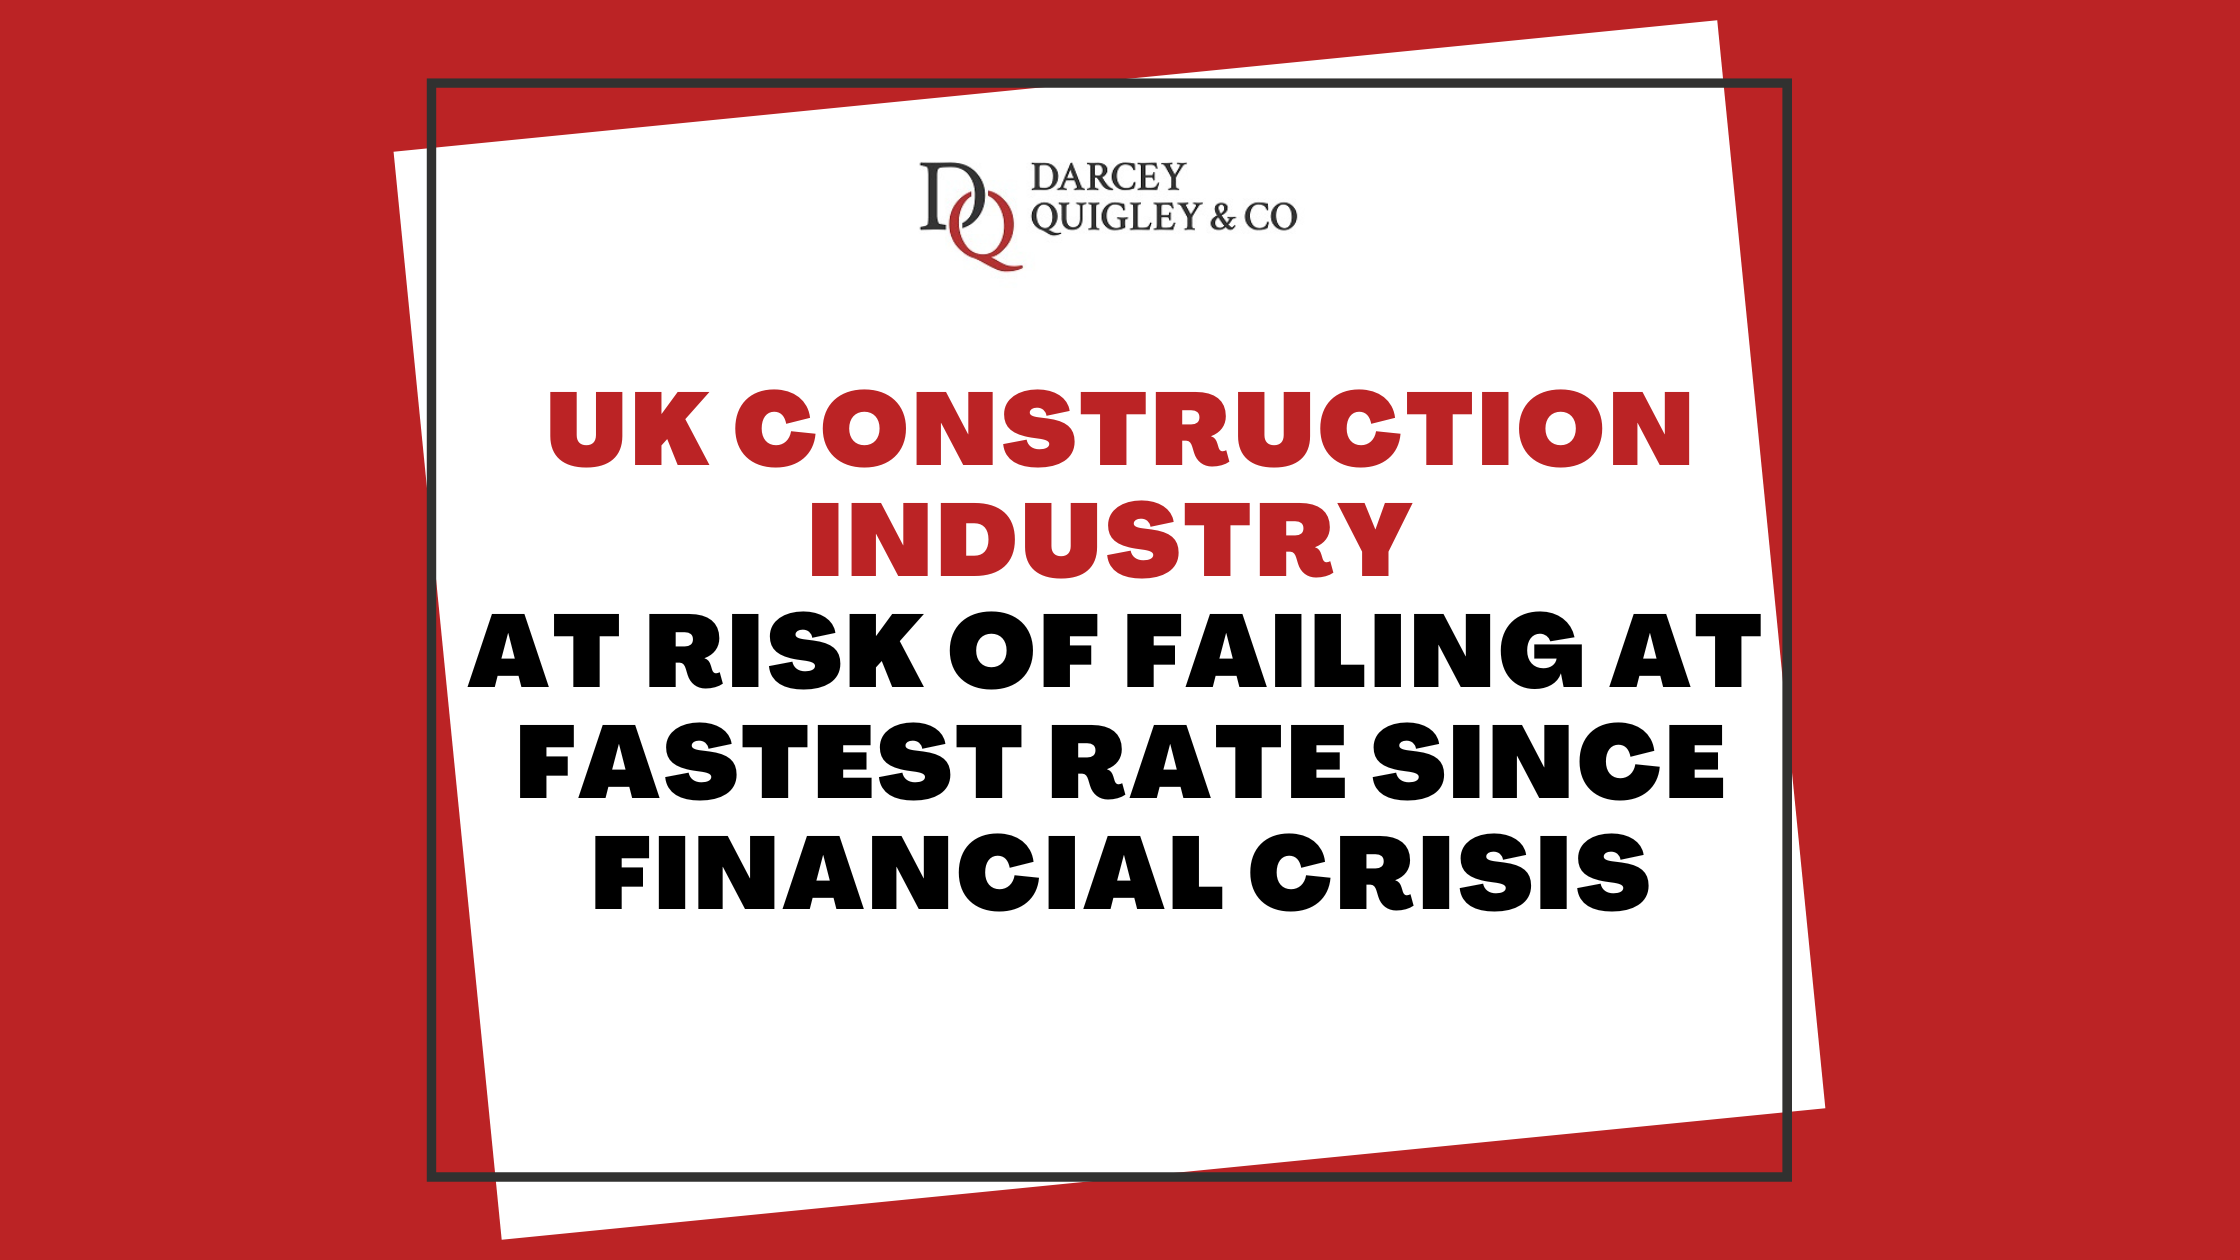 uk construction industry at risk of failing at fastest rate since financial crisis